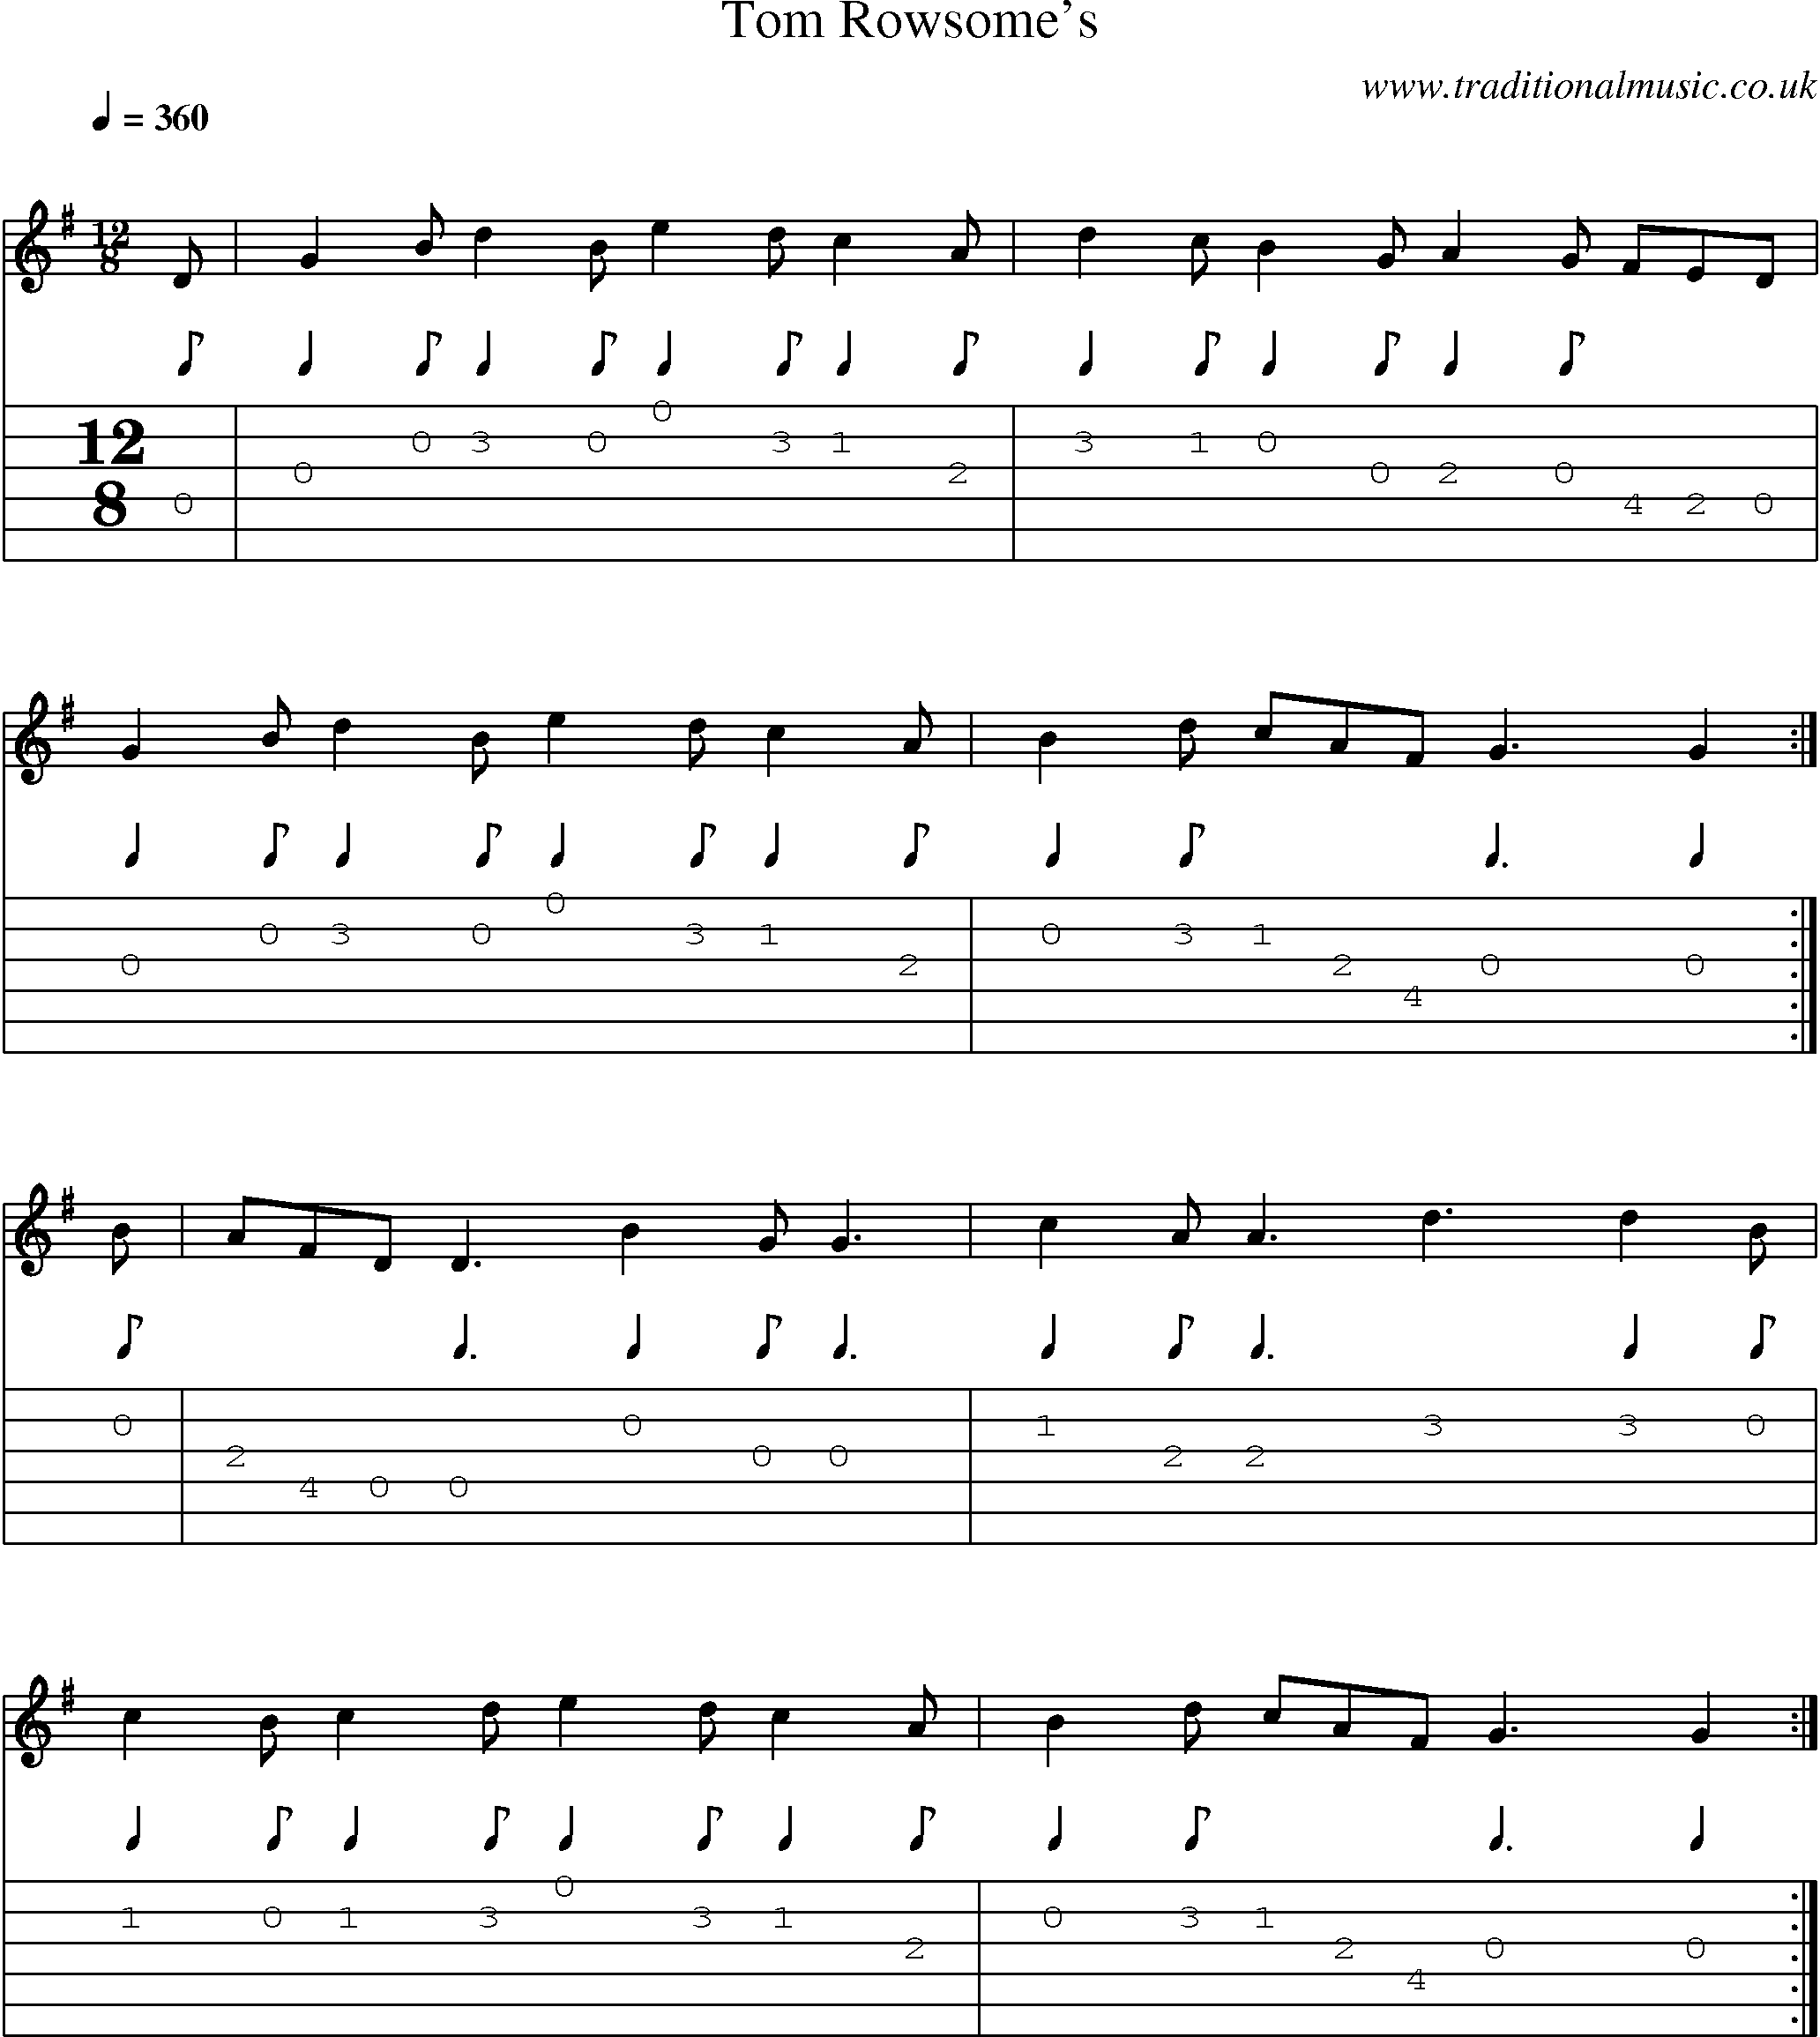 Music Score and Guitar Tabs for Tom Rowsomes